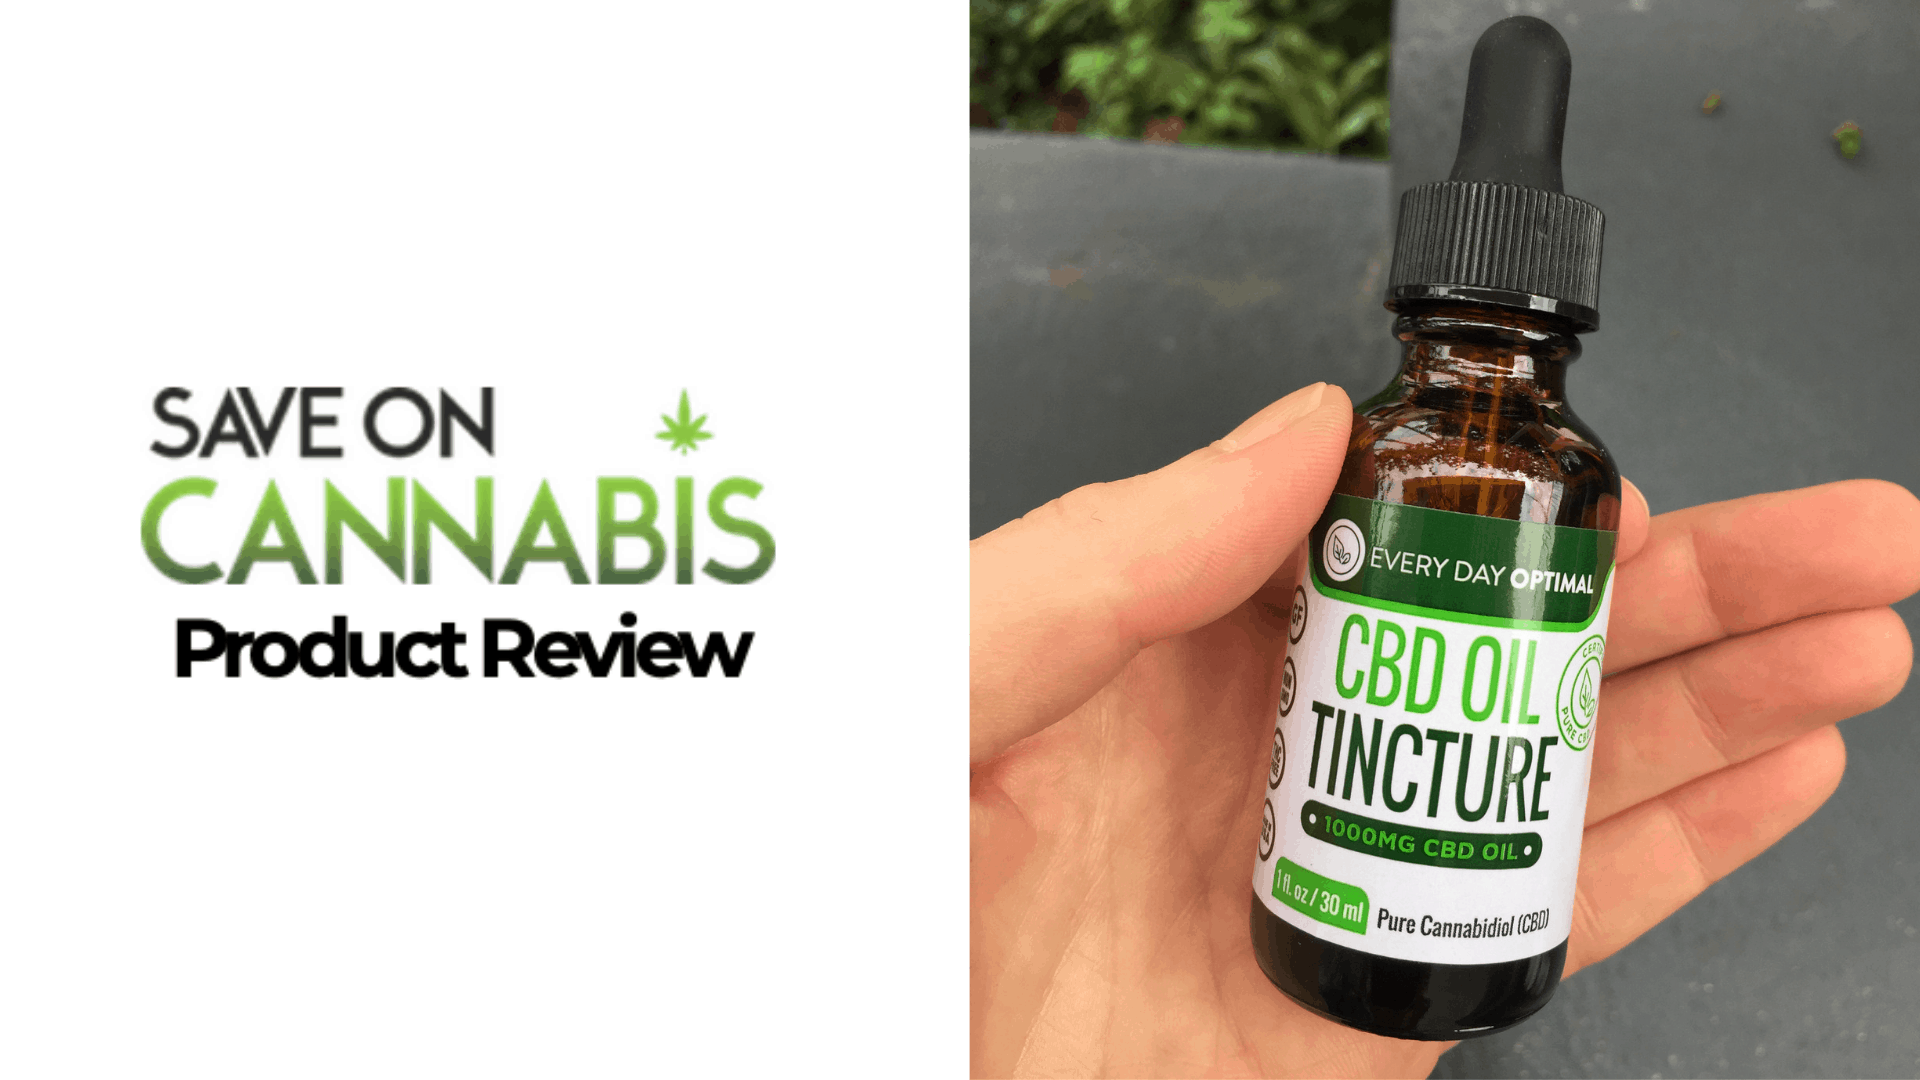 every day optimal cbd oil tincture 1,000 mg Save On Cannabis Website